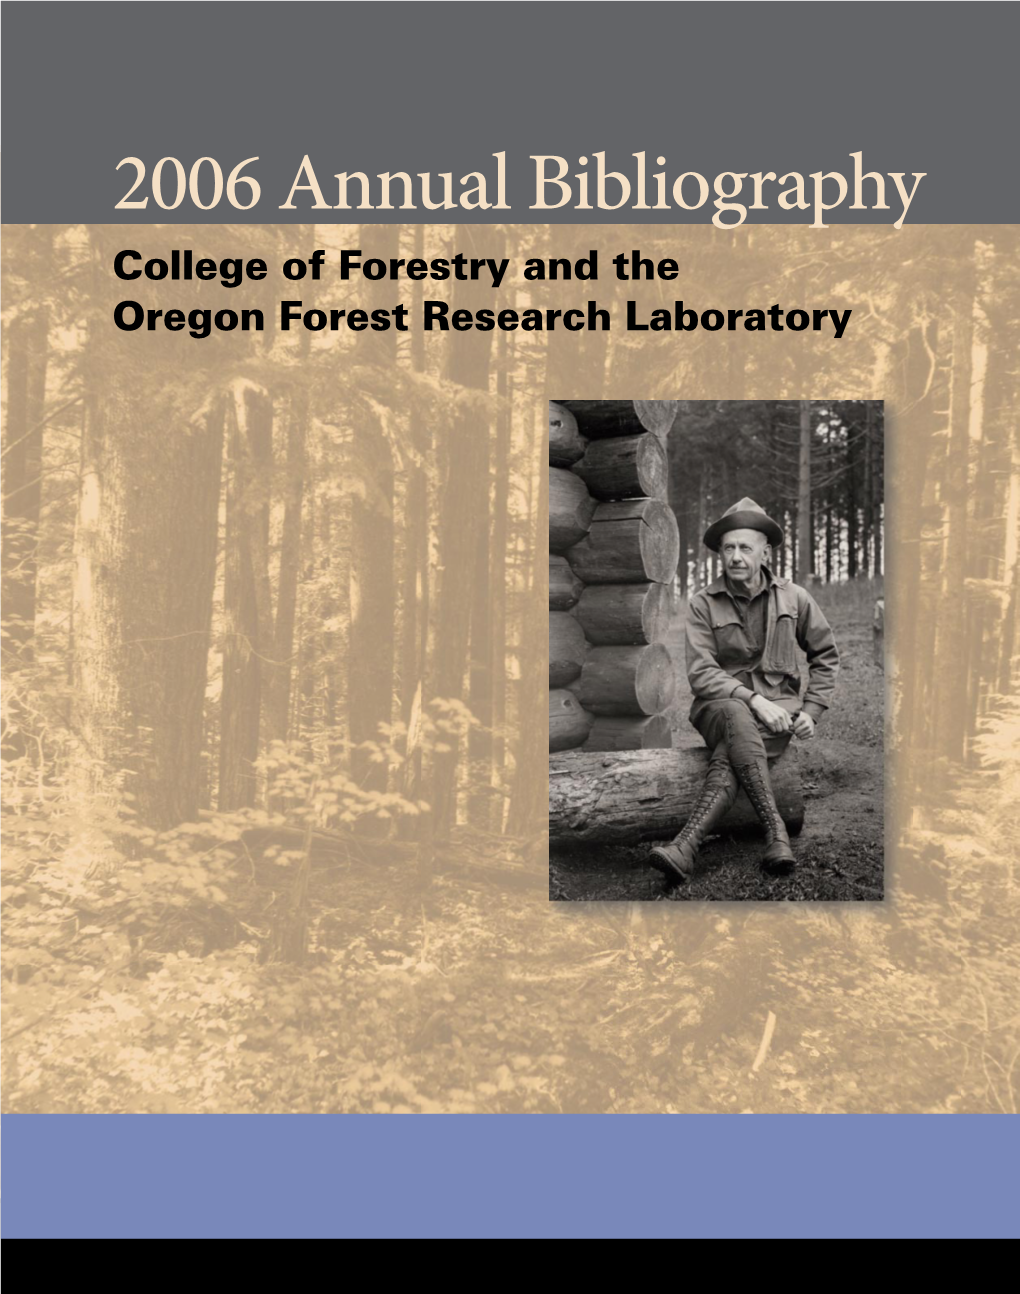 2006 Annual Bibliography College of Forestry and the Oregon Forest Research Laboratory from the Director Contents